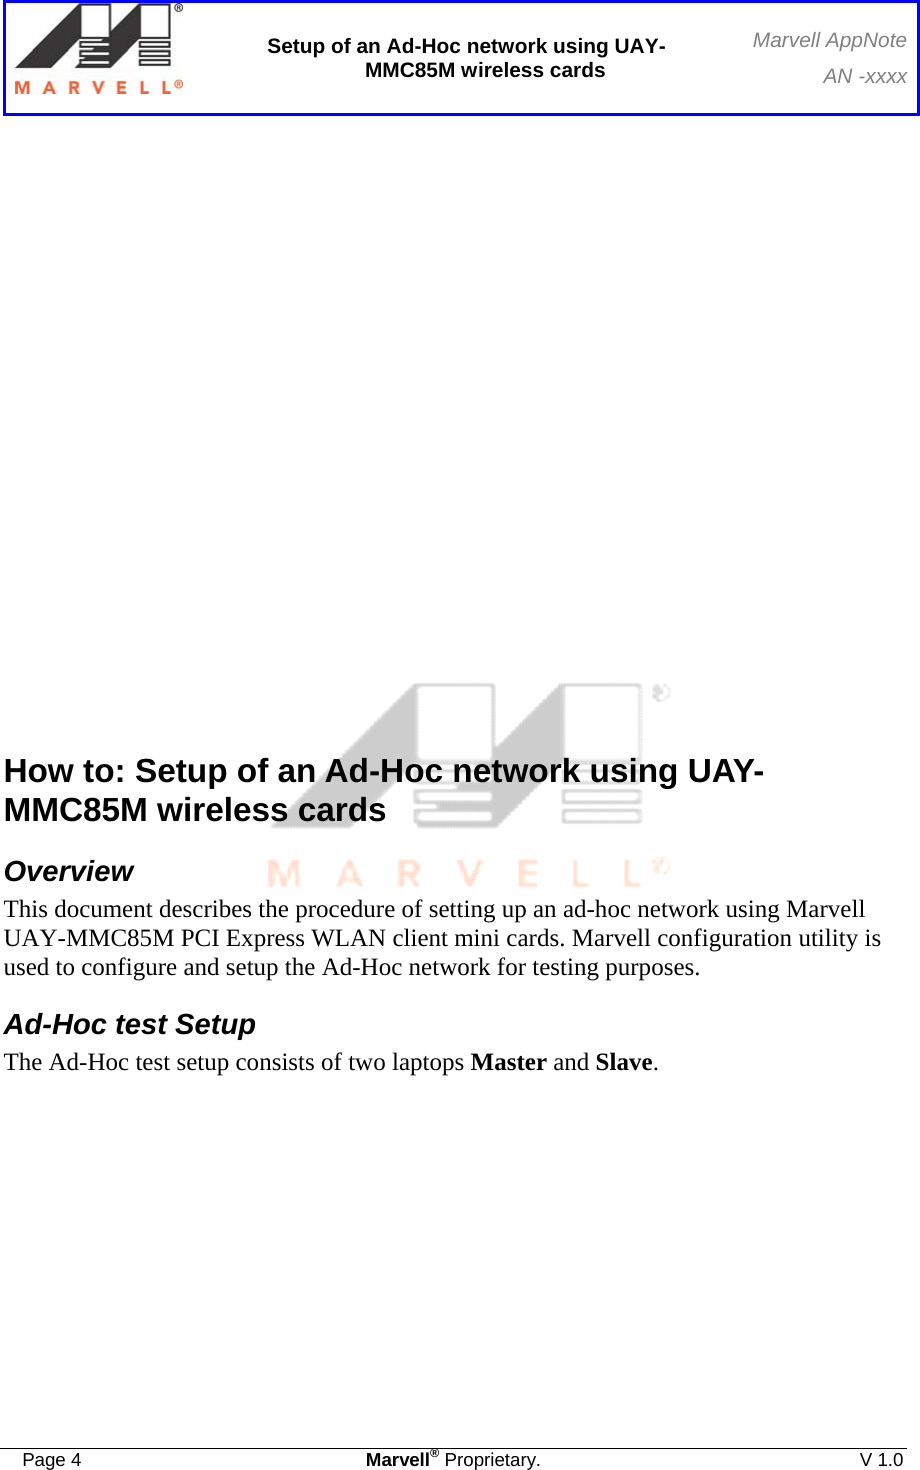  Setup of an Ad-Hoc network using UAY-MMC85M wireless cards Marvell AppNoteAN -xxxx  Page 4  Marvell® Proprietary.  V 1.0            How to: Setup of an Ad-Hoc network using UAY-MMC85M wireless cards Overview This document describes the procedure of setting up an ad-hoc network using Marvell UAY-MMC85M PCI Express WLAN client mini cards. Marvell configuration utility is used to configure and setup the Ad-Hoc network for testing purposes. Ad-Hoc test Setup The Ad-Hoc test setup consists of two laptops Master and Slave.   